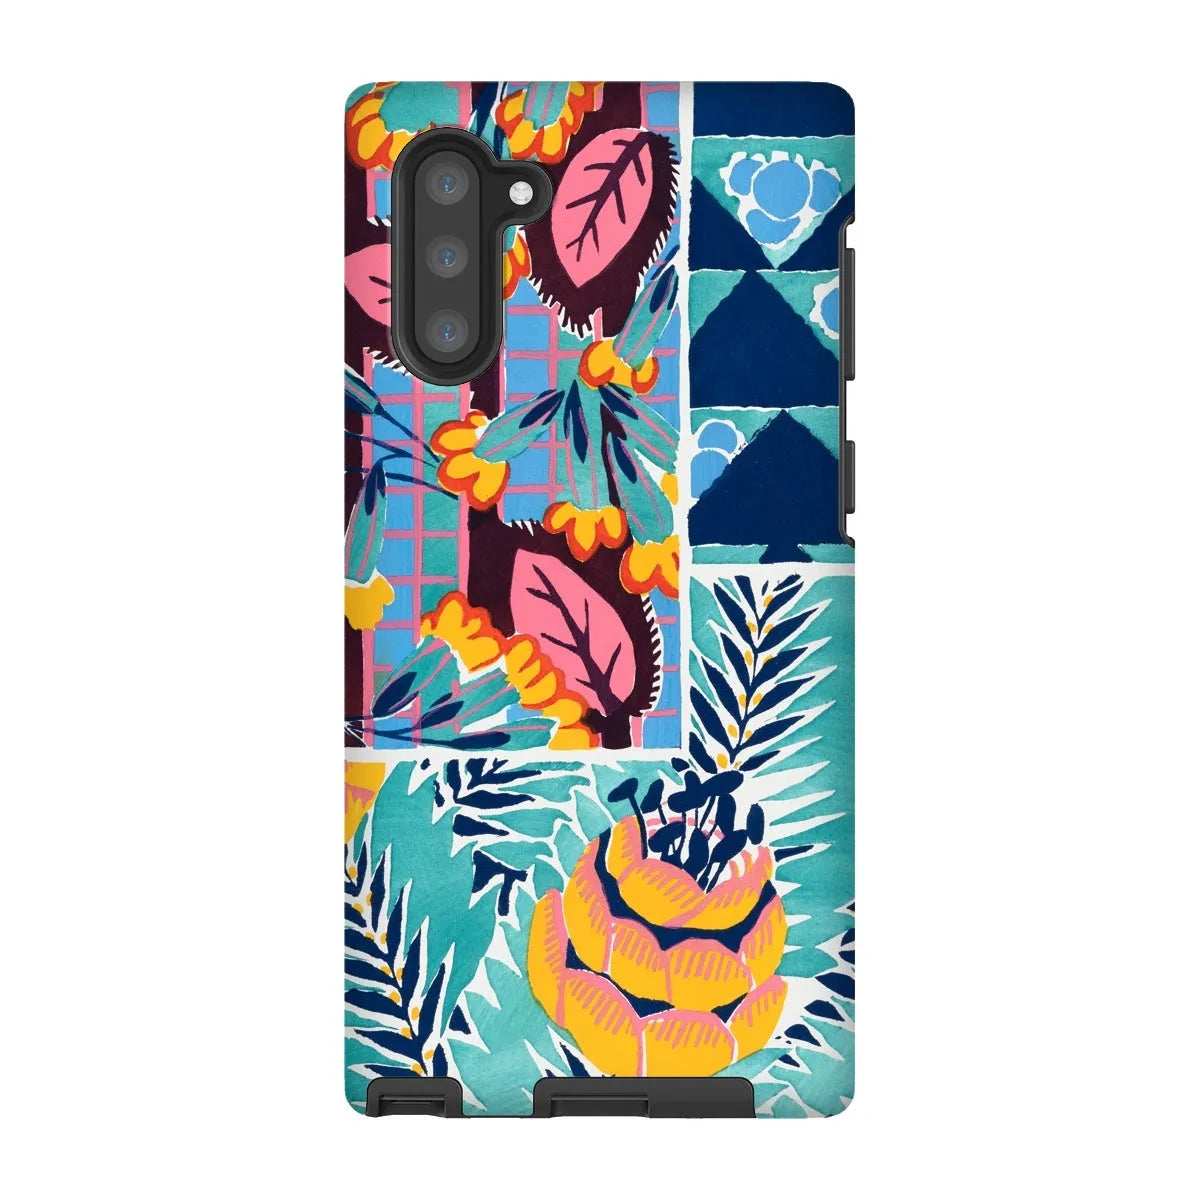 Fabric & Rugs - Pochoir Patterns Phone Case - E. A. Séguy - Samsung Galaxy Note 10 / Matte - Mobile Phone Cases